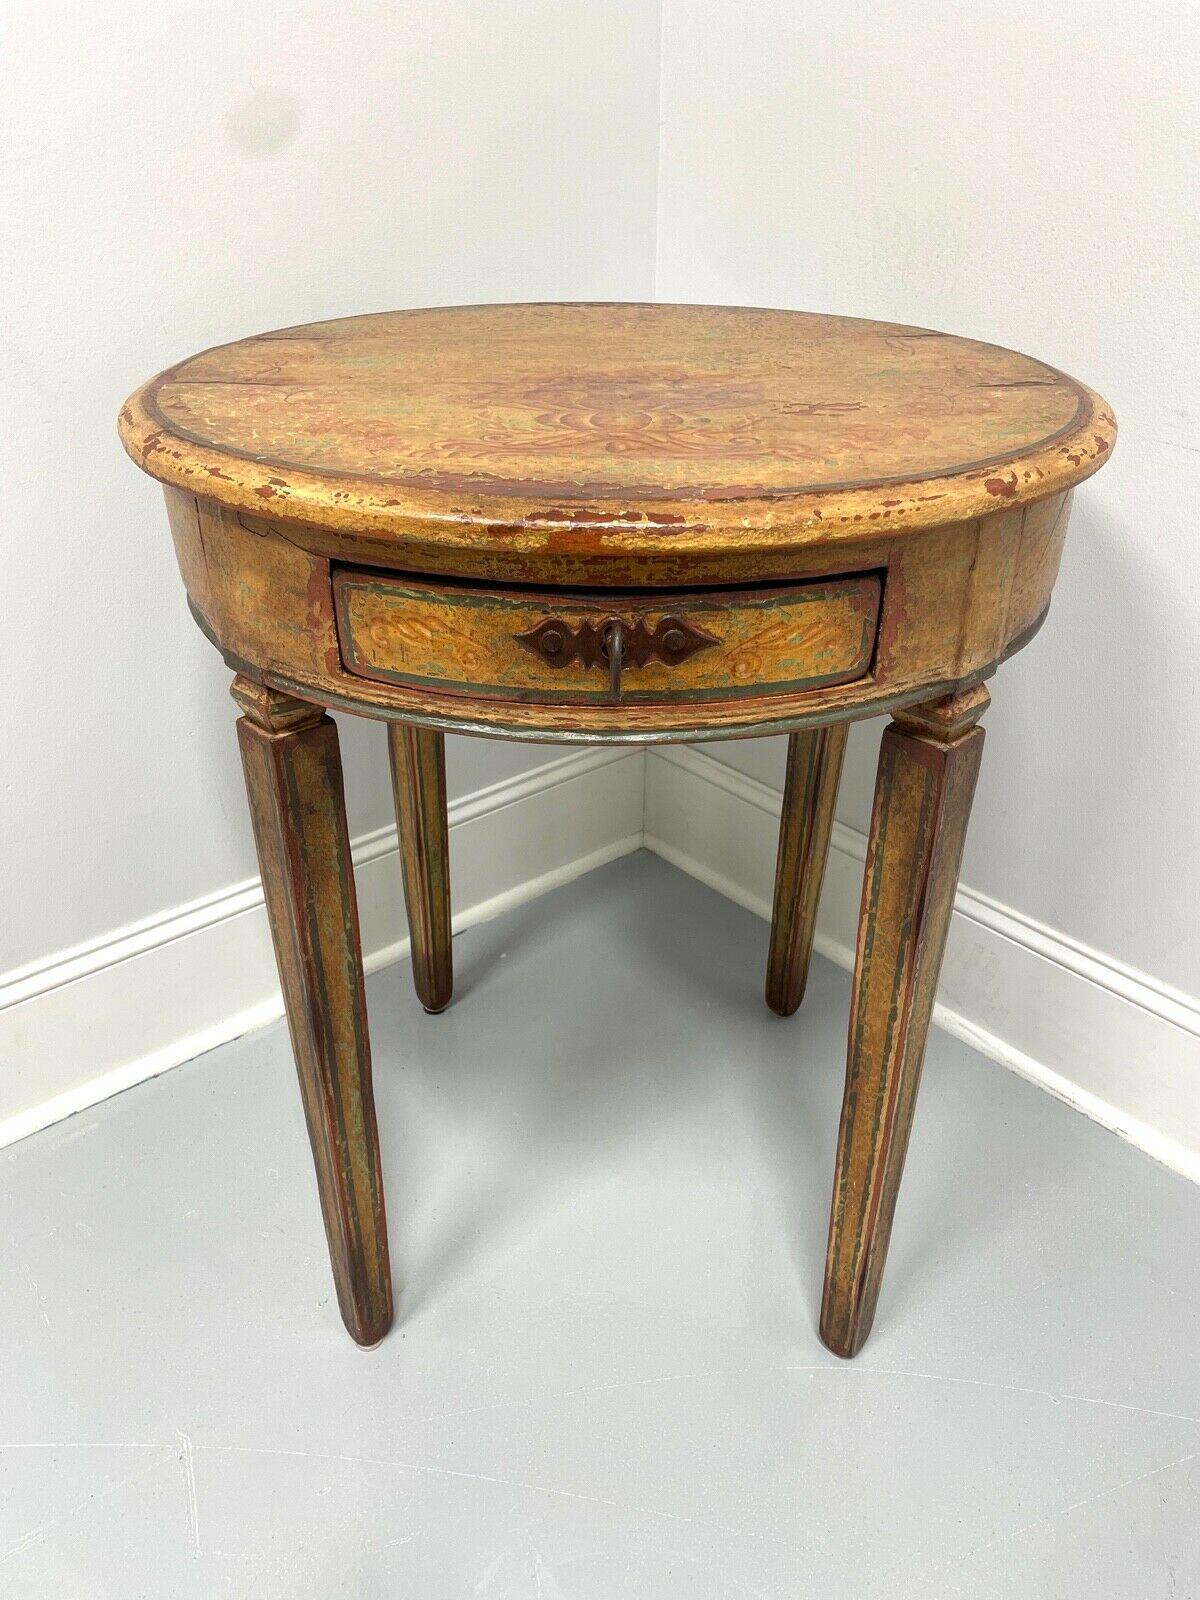 This antique 18th century round accent table has been painted and repainted over the years. The multiple layers of paint show through the wear and appear to have been preserved by a top coat of varnish. Solid wood with metal hardware and straight